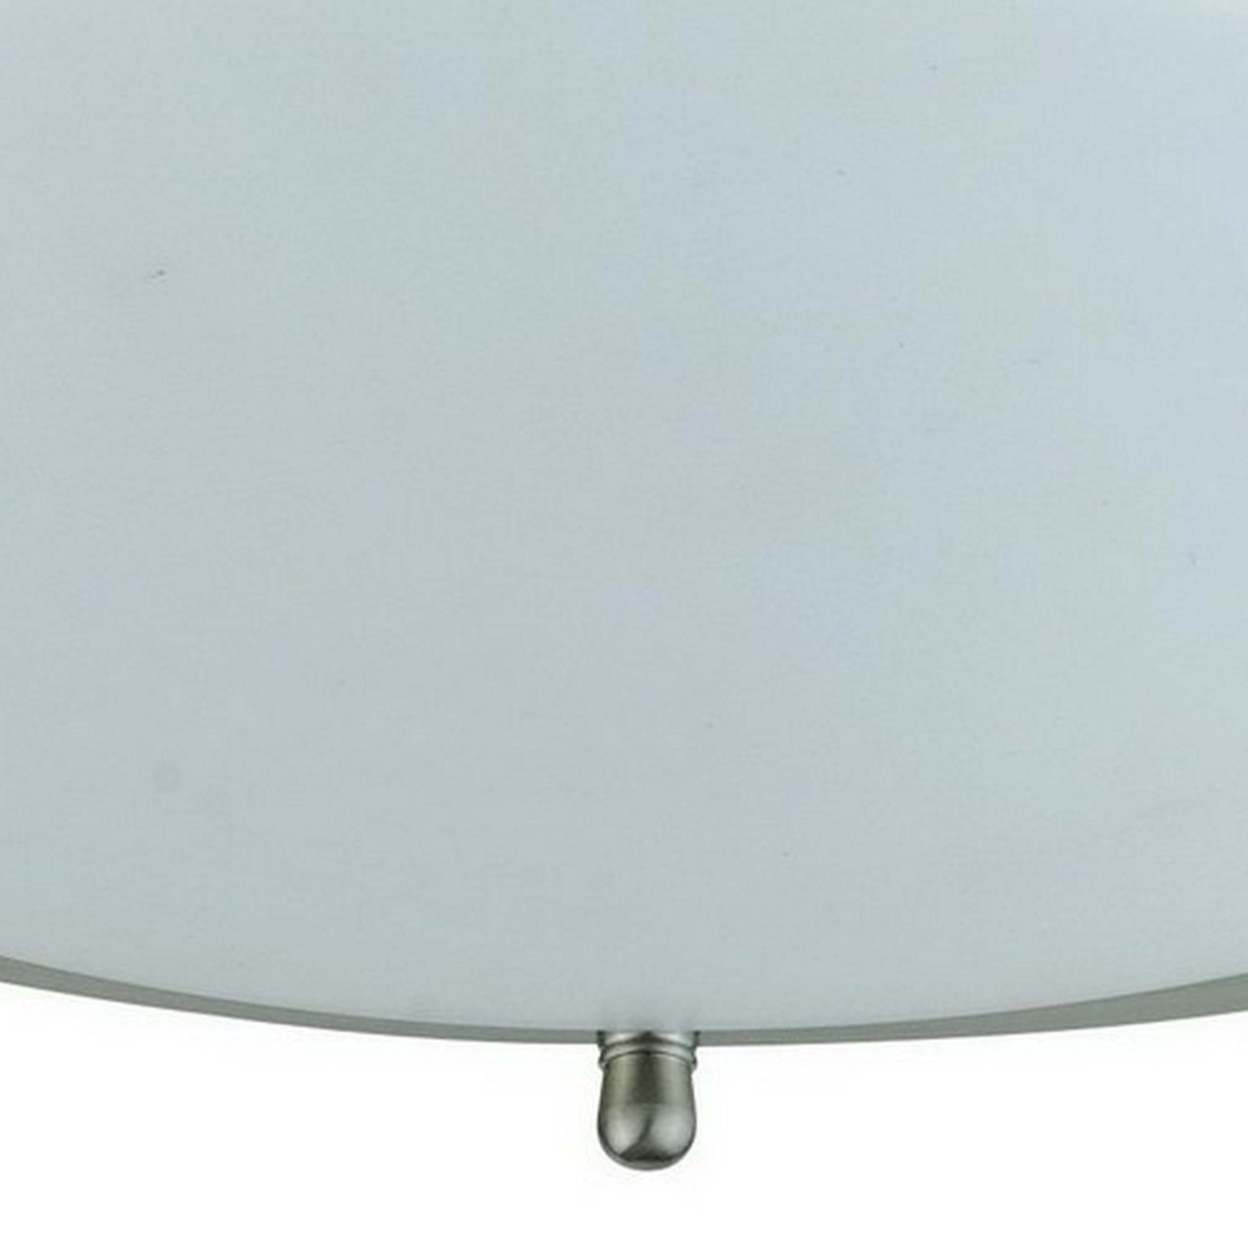 10 Inch Modern Ceiling Lamp With Frosted Acrylic Plate, Steel Trim, White- Saltoro Sherpi